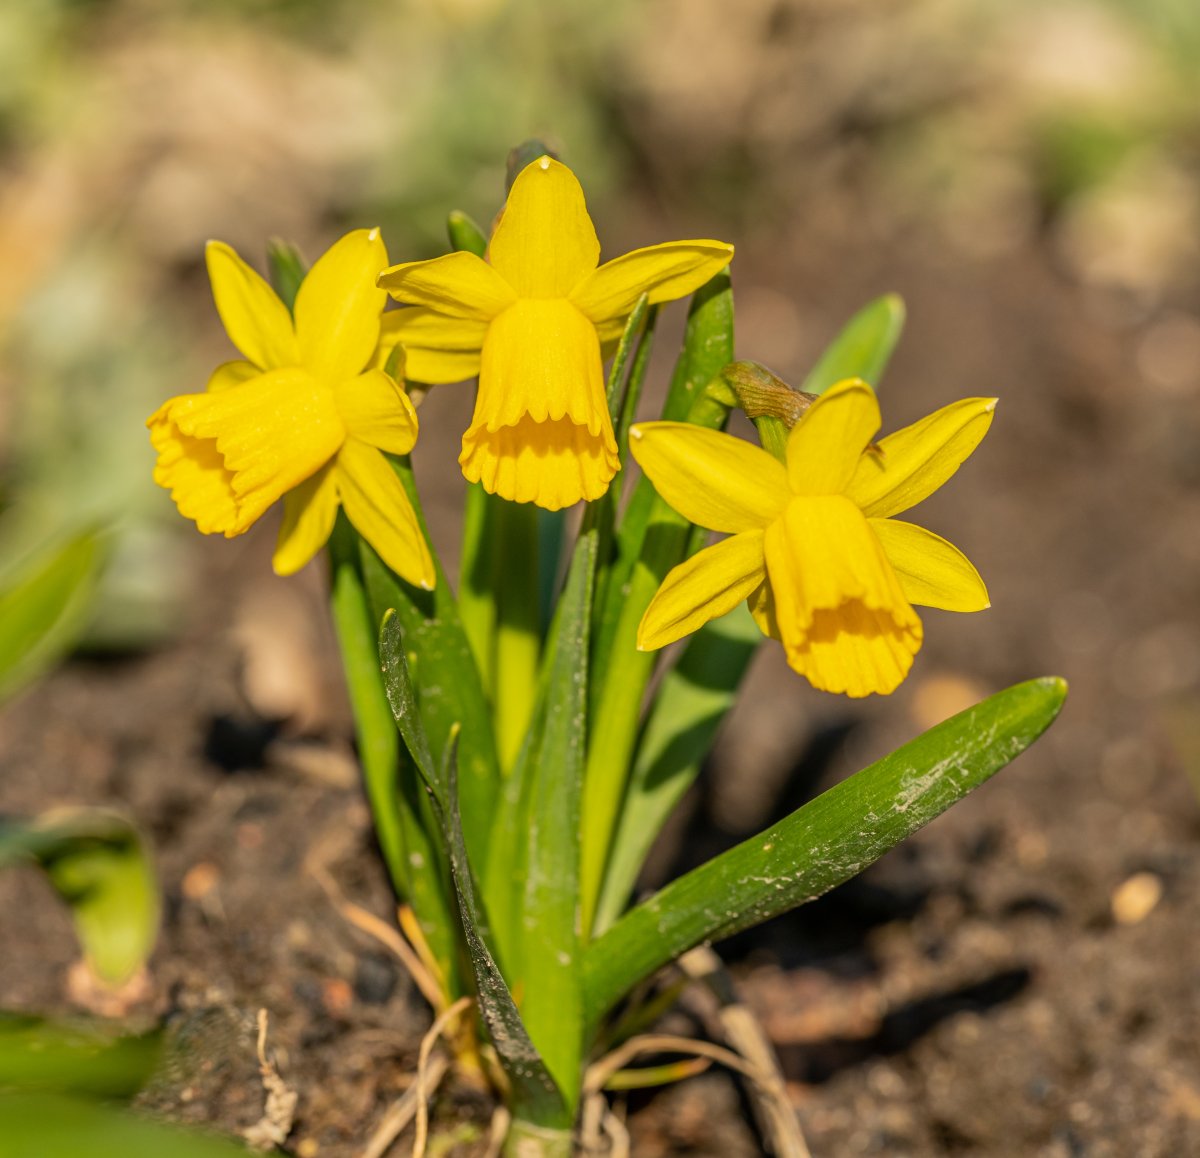 Wild daffodils pictures